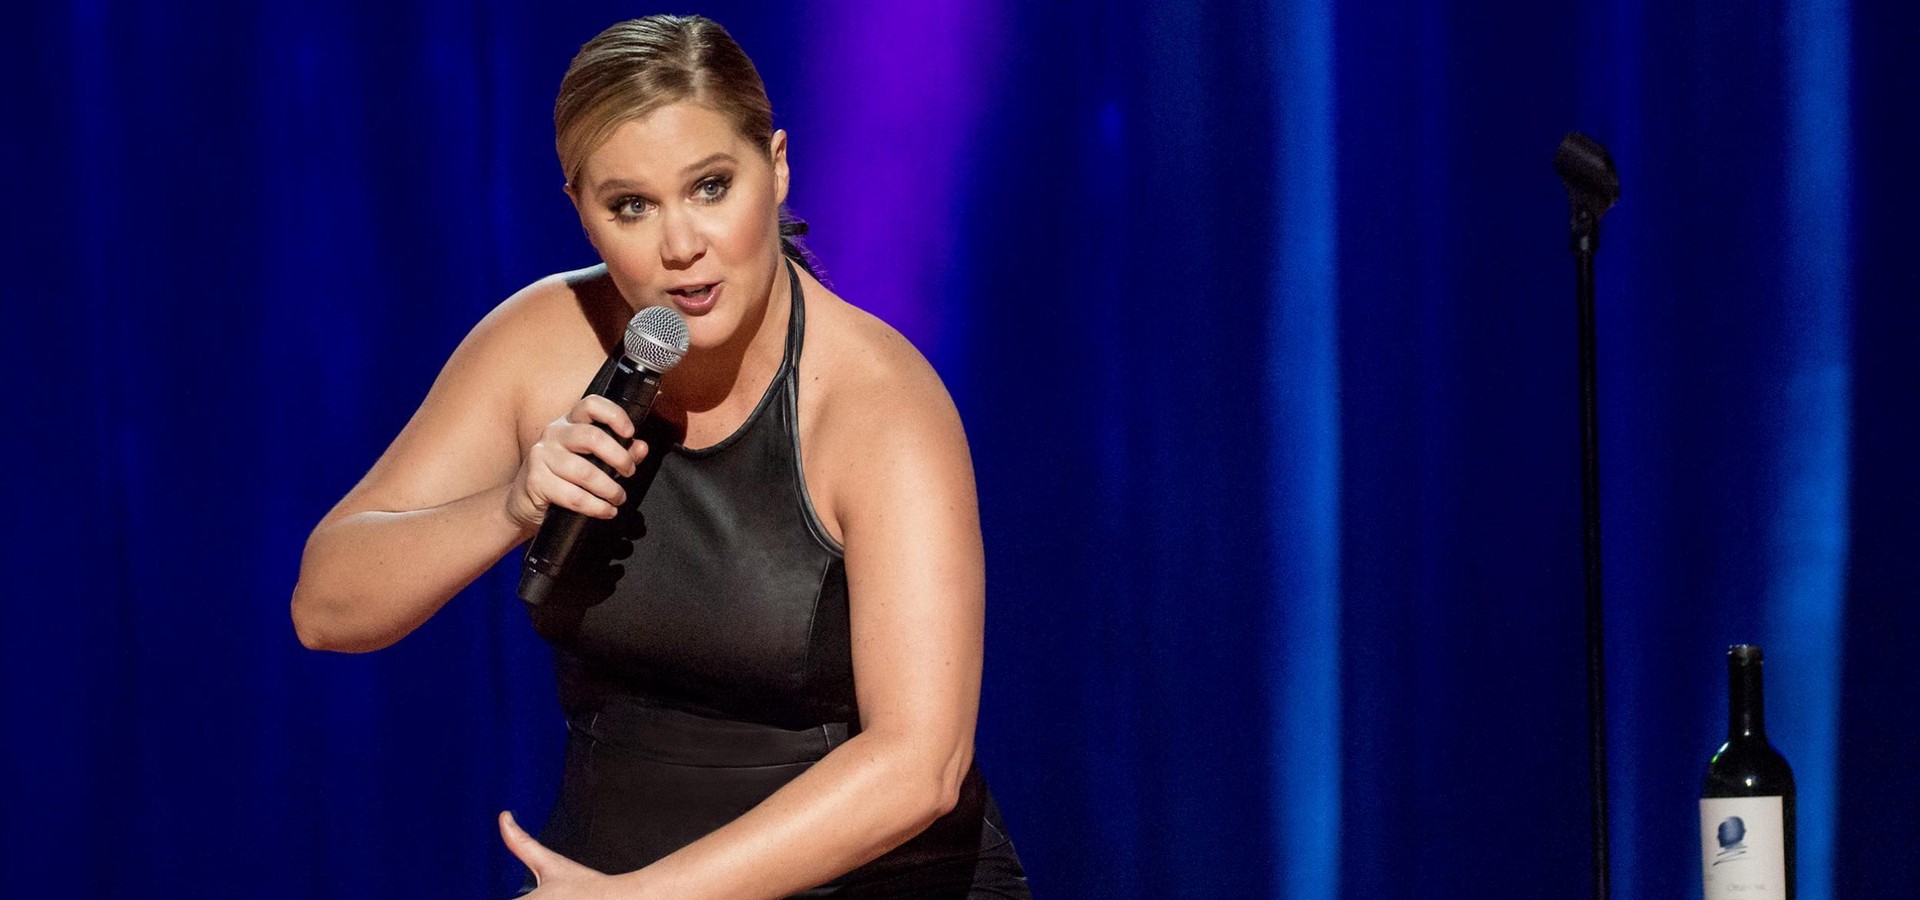 Amy Schumer: The Leather Special